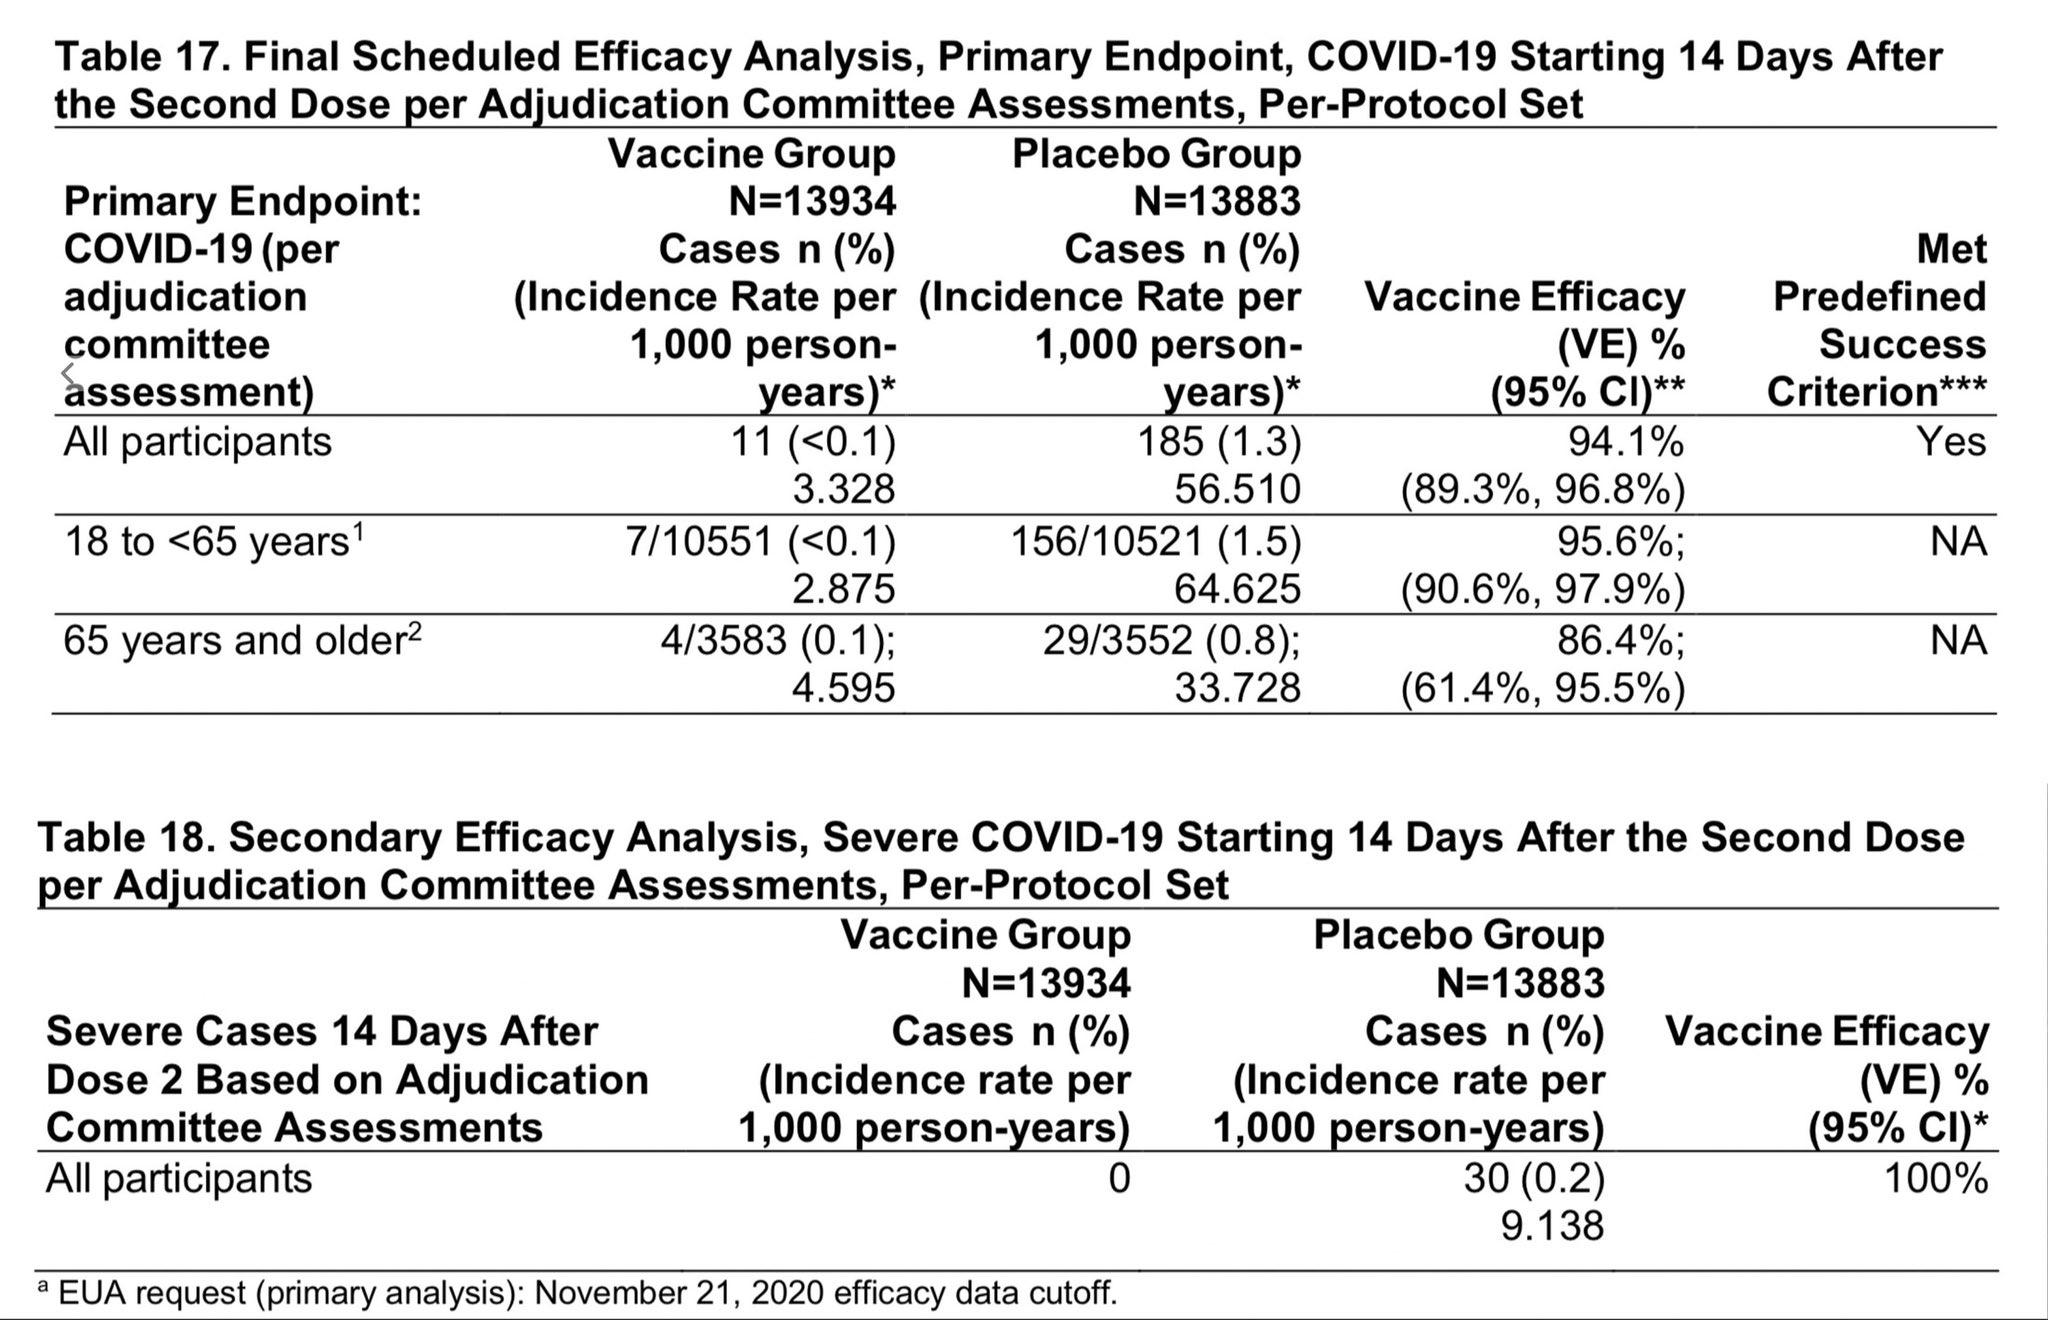 David R. Liu on Twitter: "Want to review #SARSCoV2 #COVID19 safety and efficacy data yourself? Linked below is the briefing document for the FDA vaccine committee on Moderna's mRNA